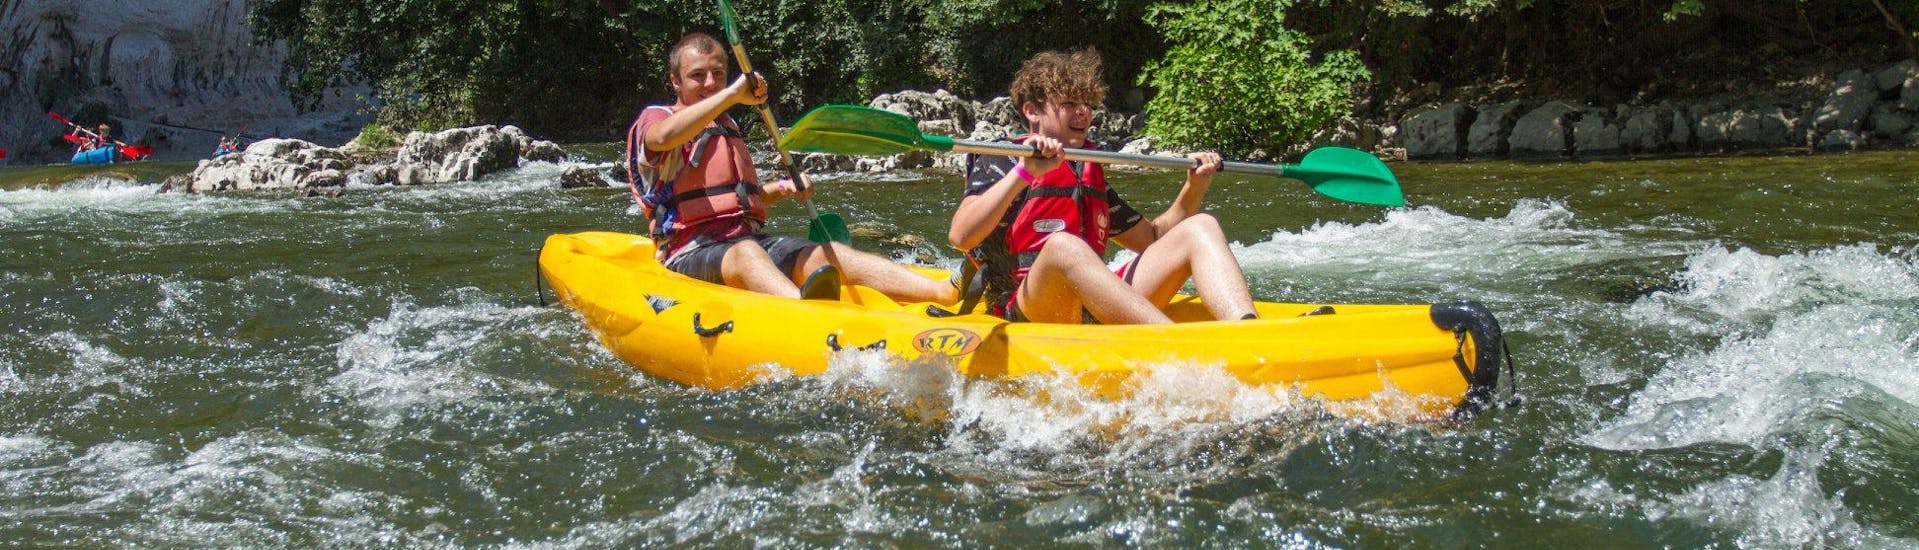 Two young boys having fun while canoeing on the Ardèche river in France with the service provided by Viking Bateaux.